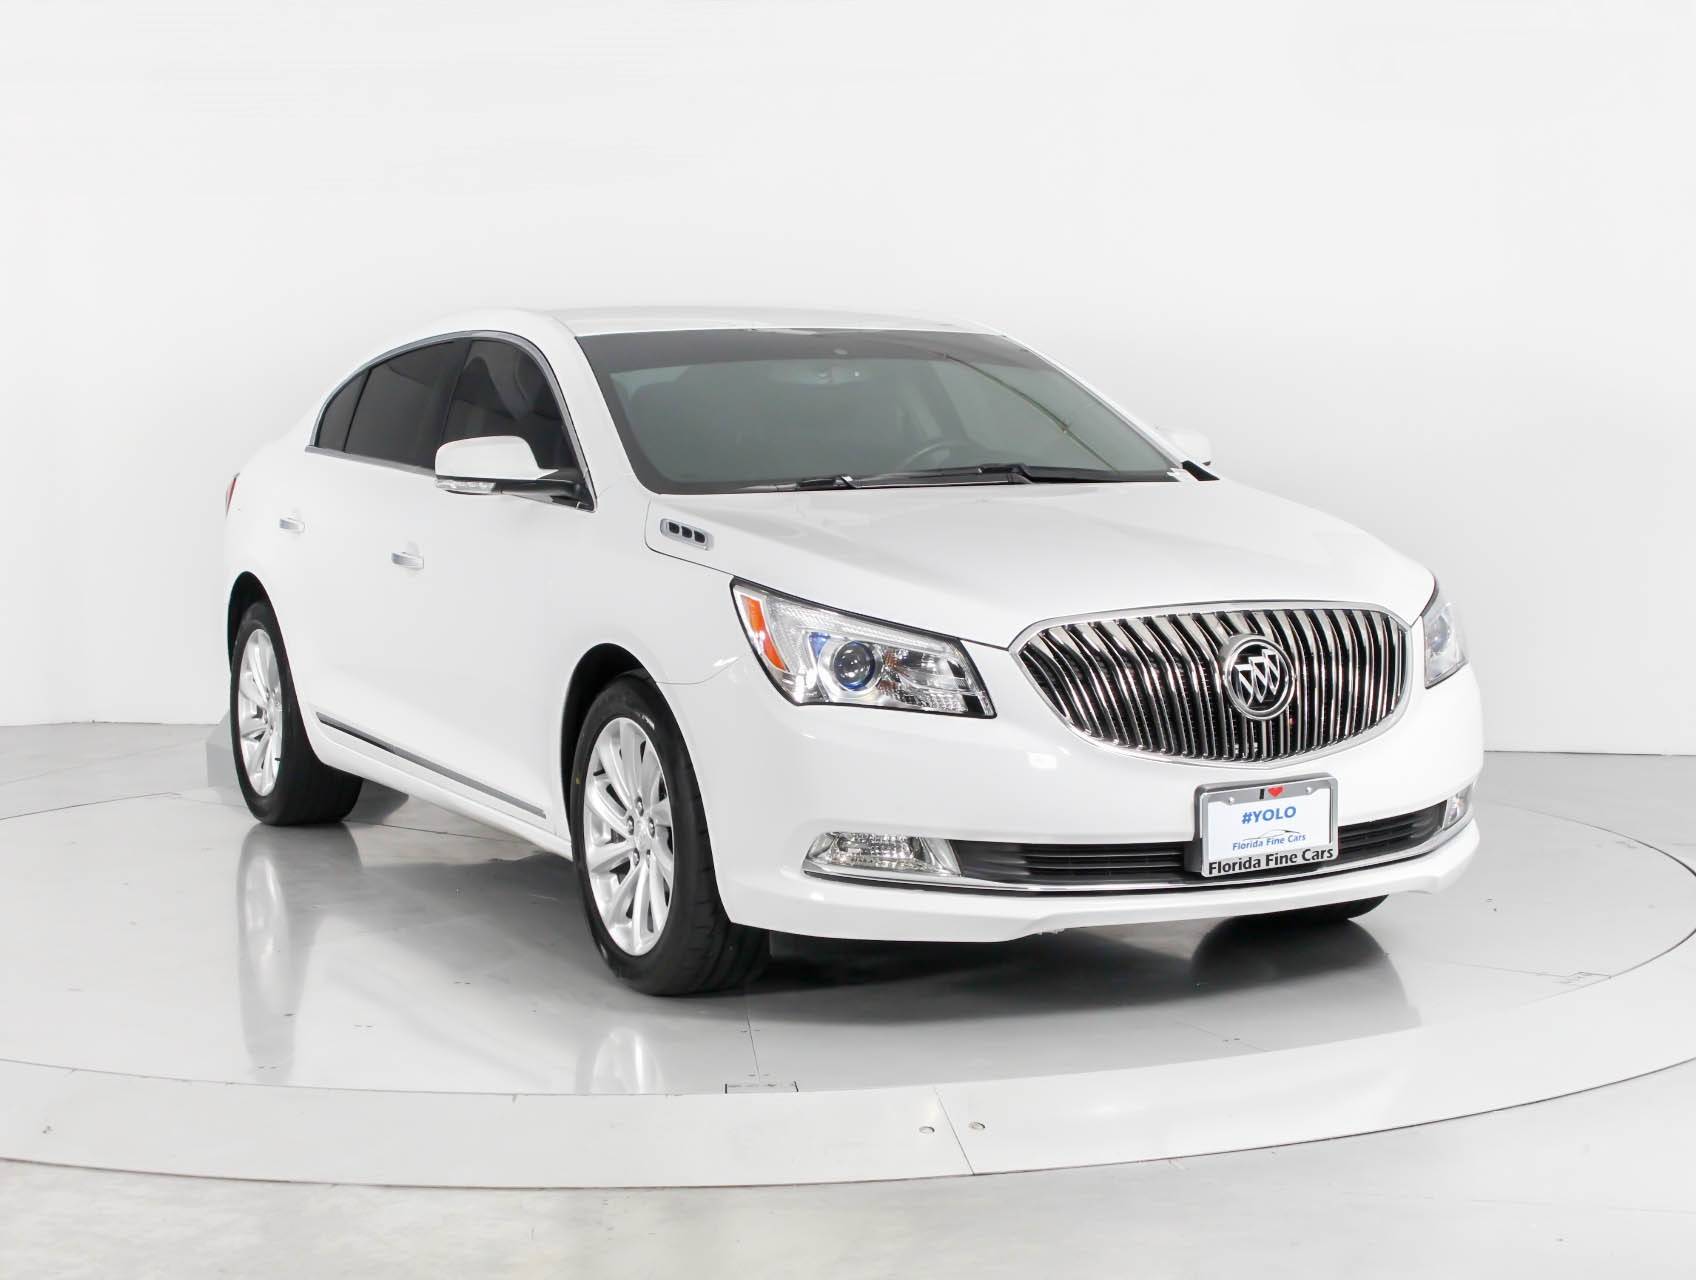 Florida Fine Cars - Used BUICK LACROSSE 2016 WEST PALM LEATHER